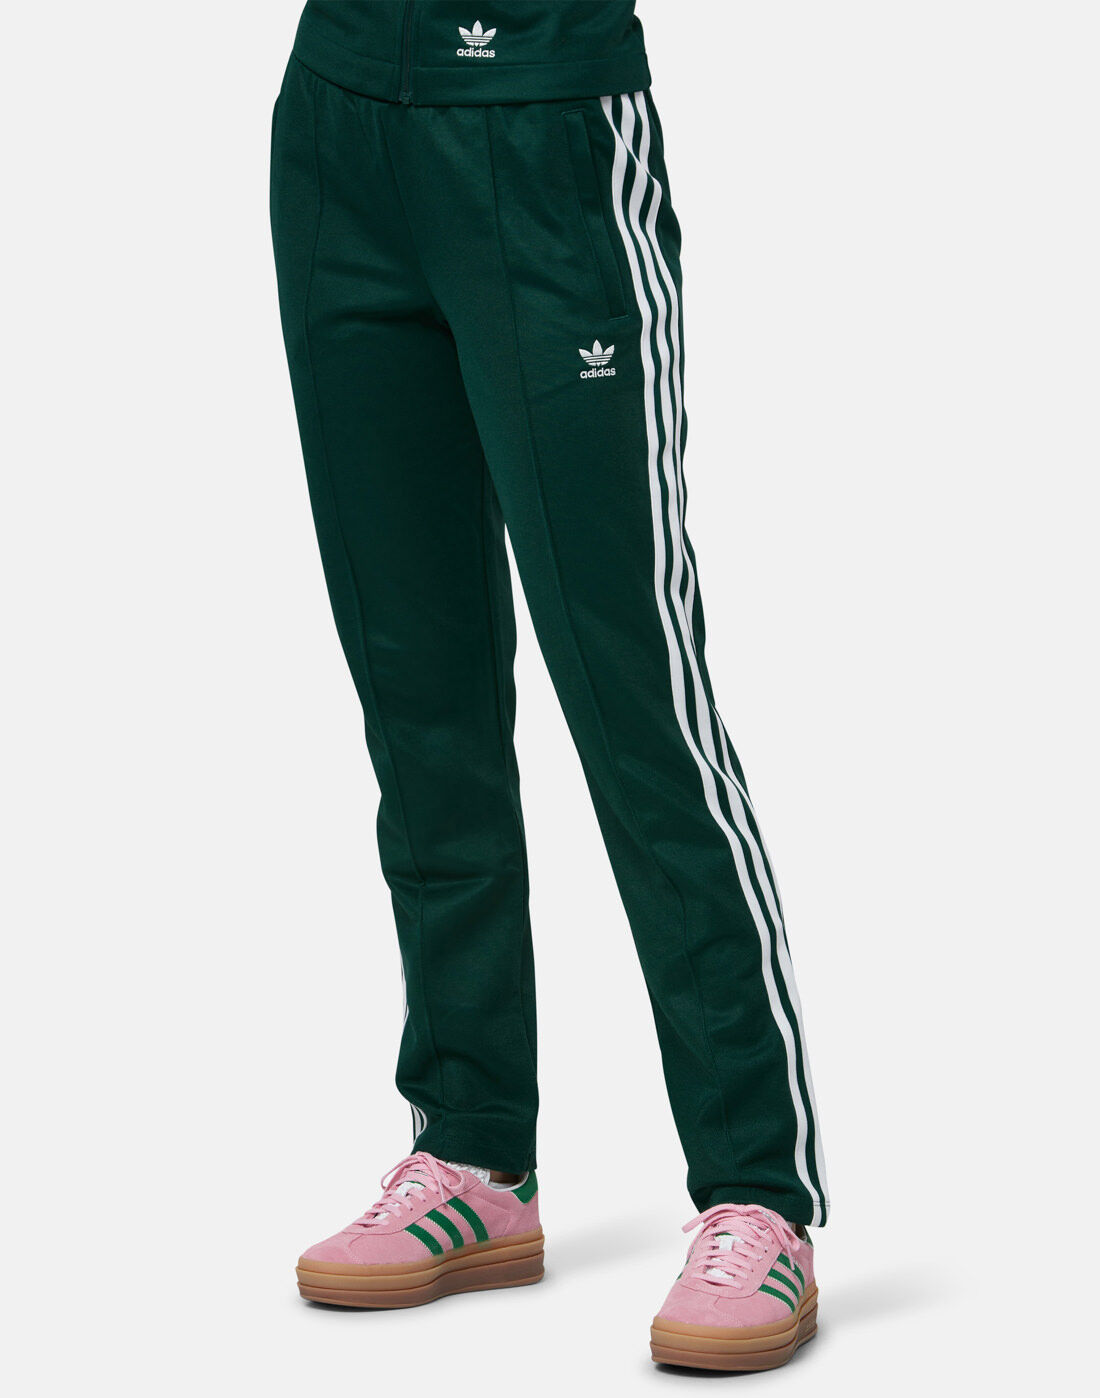 Buy ADIDAS Originals Women Open Hem Relaxed Fit Pure Cotton Track Pants -  Track Pants for Women 24135082 | Myntra